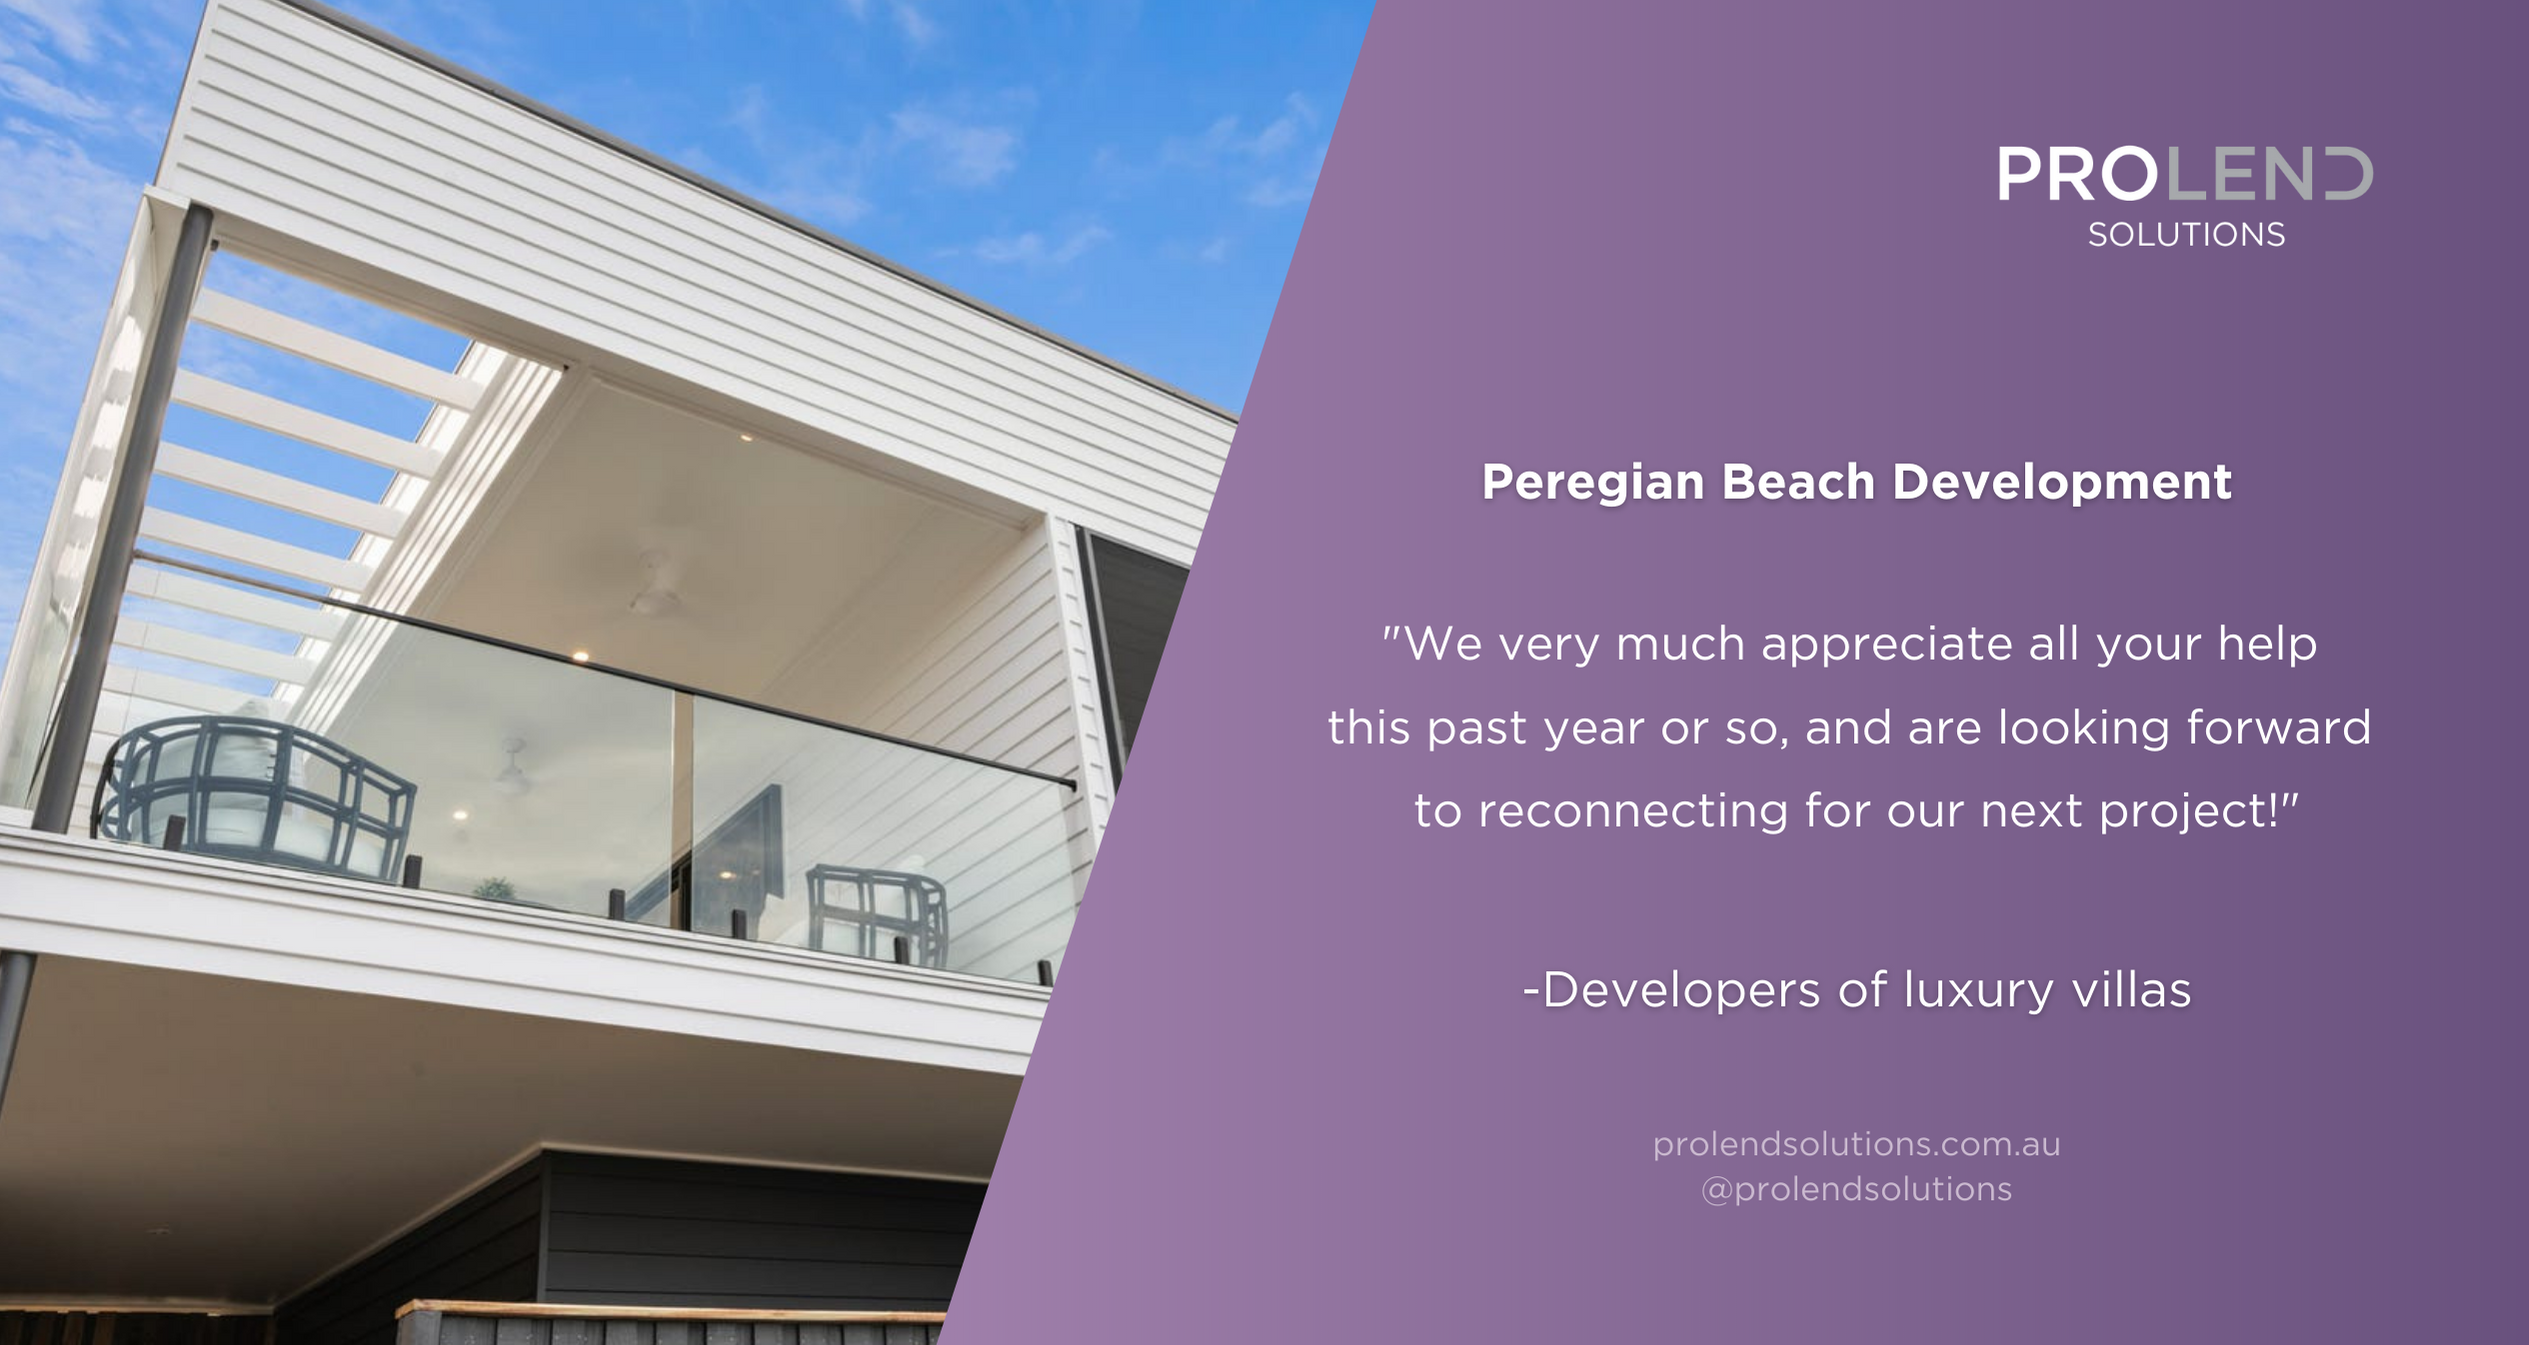 Peregian Beach Development - Customer Testimonial - We very much appreciate all your help this past year or so, and are looking forward to reconnecting for our next project!